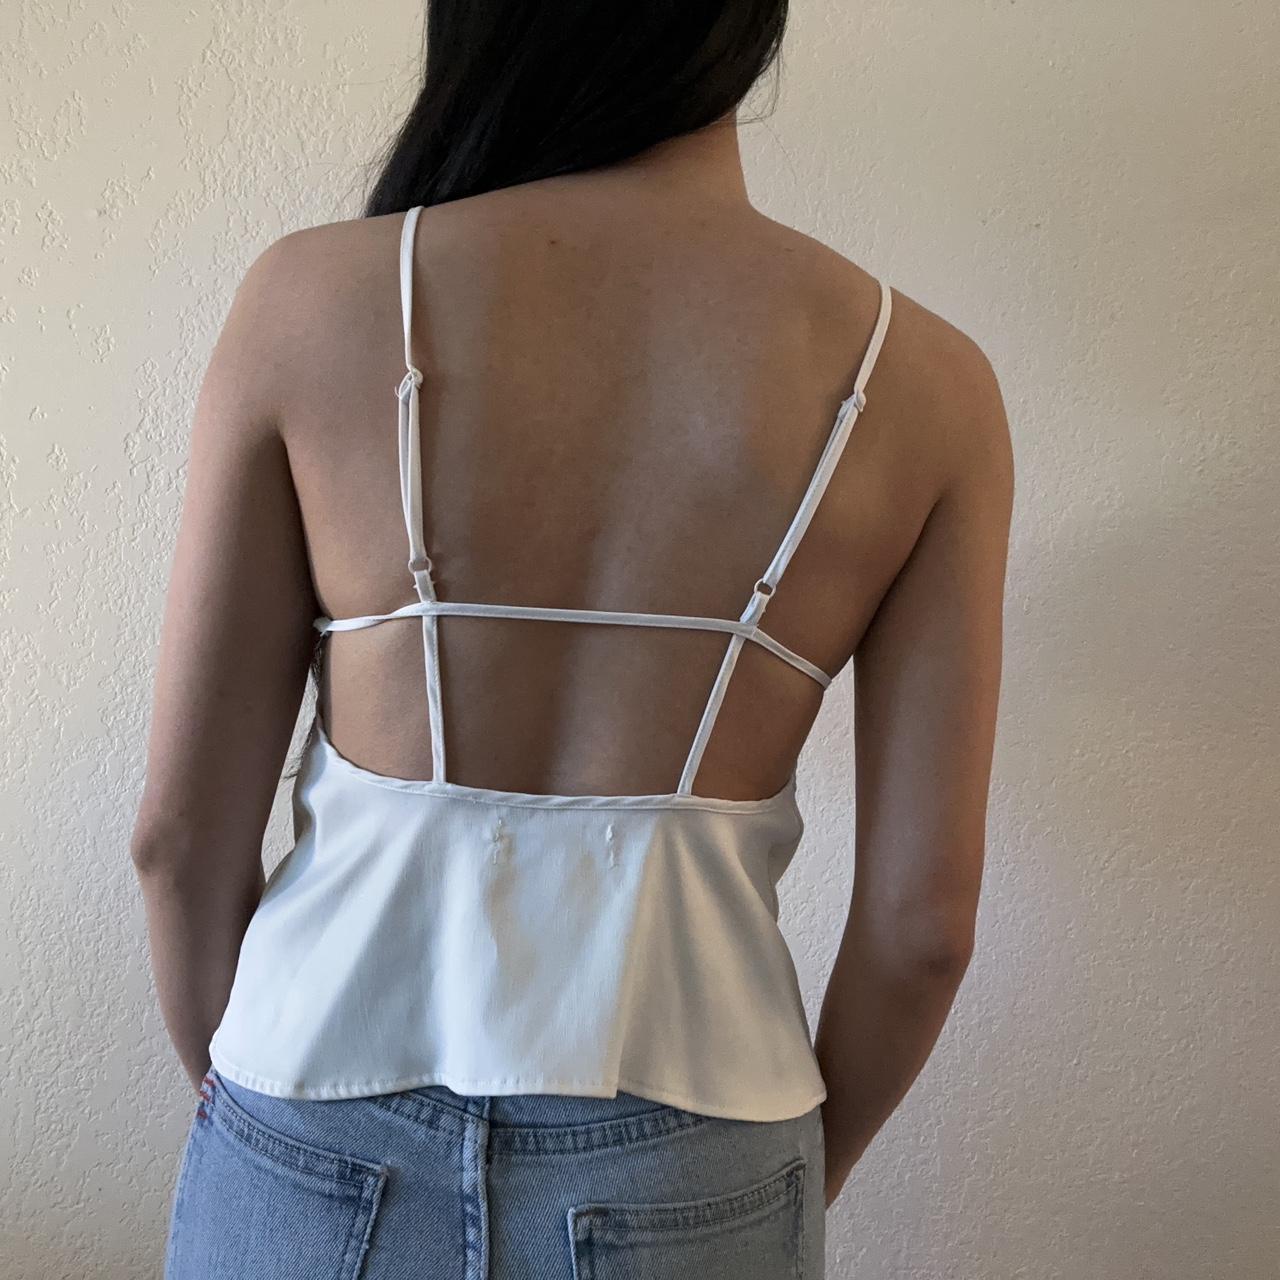 Urban Outfitters Women's White Vest (4)